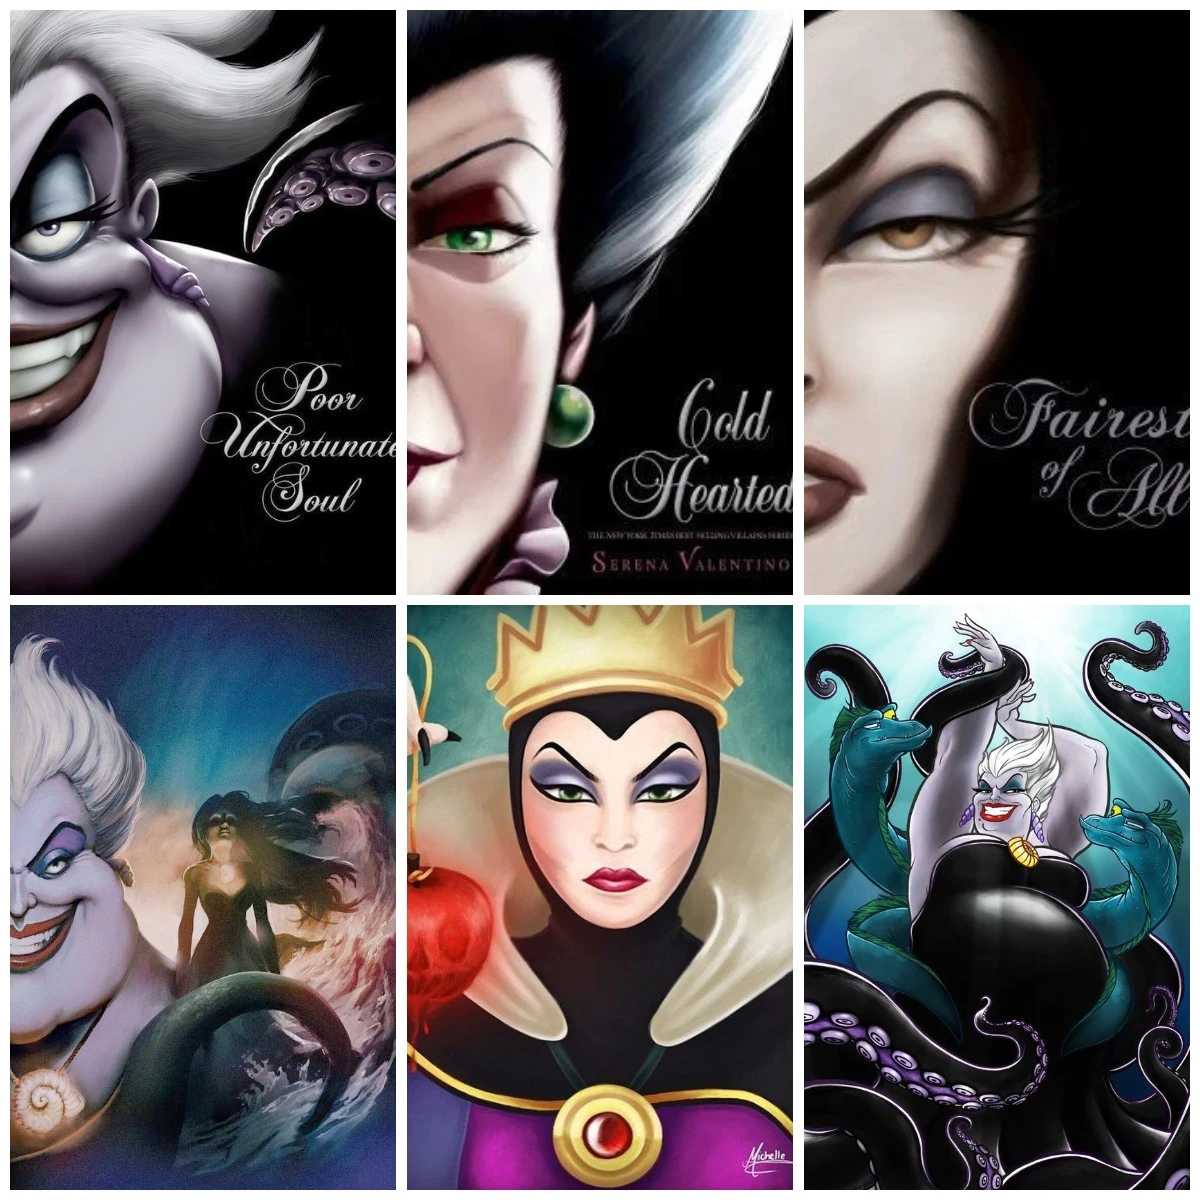 Home Decor Art HD Print on Canvas Abstract Painting Disney Sinister Villains